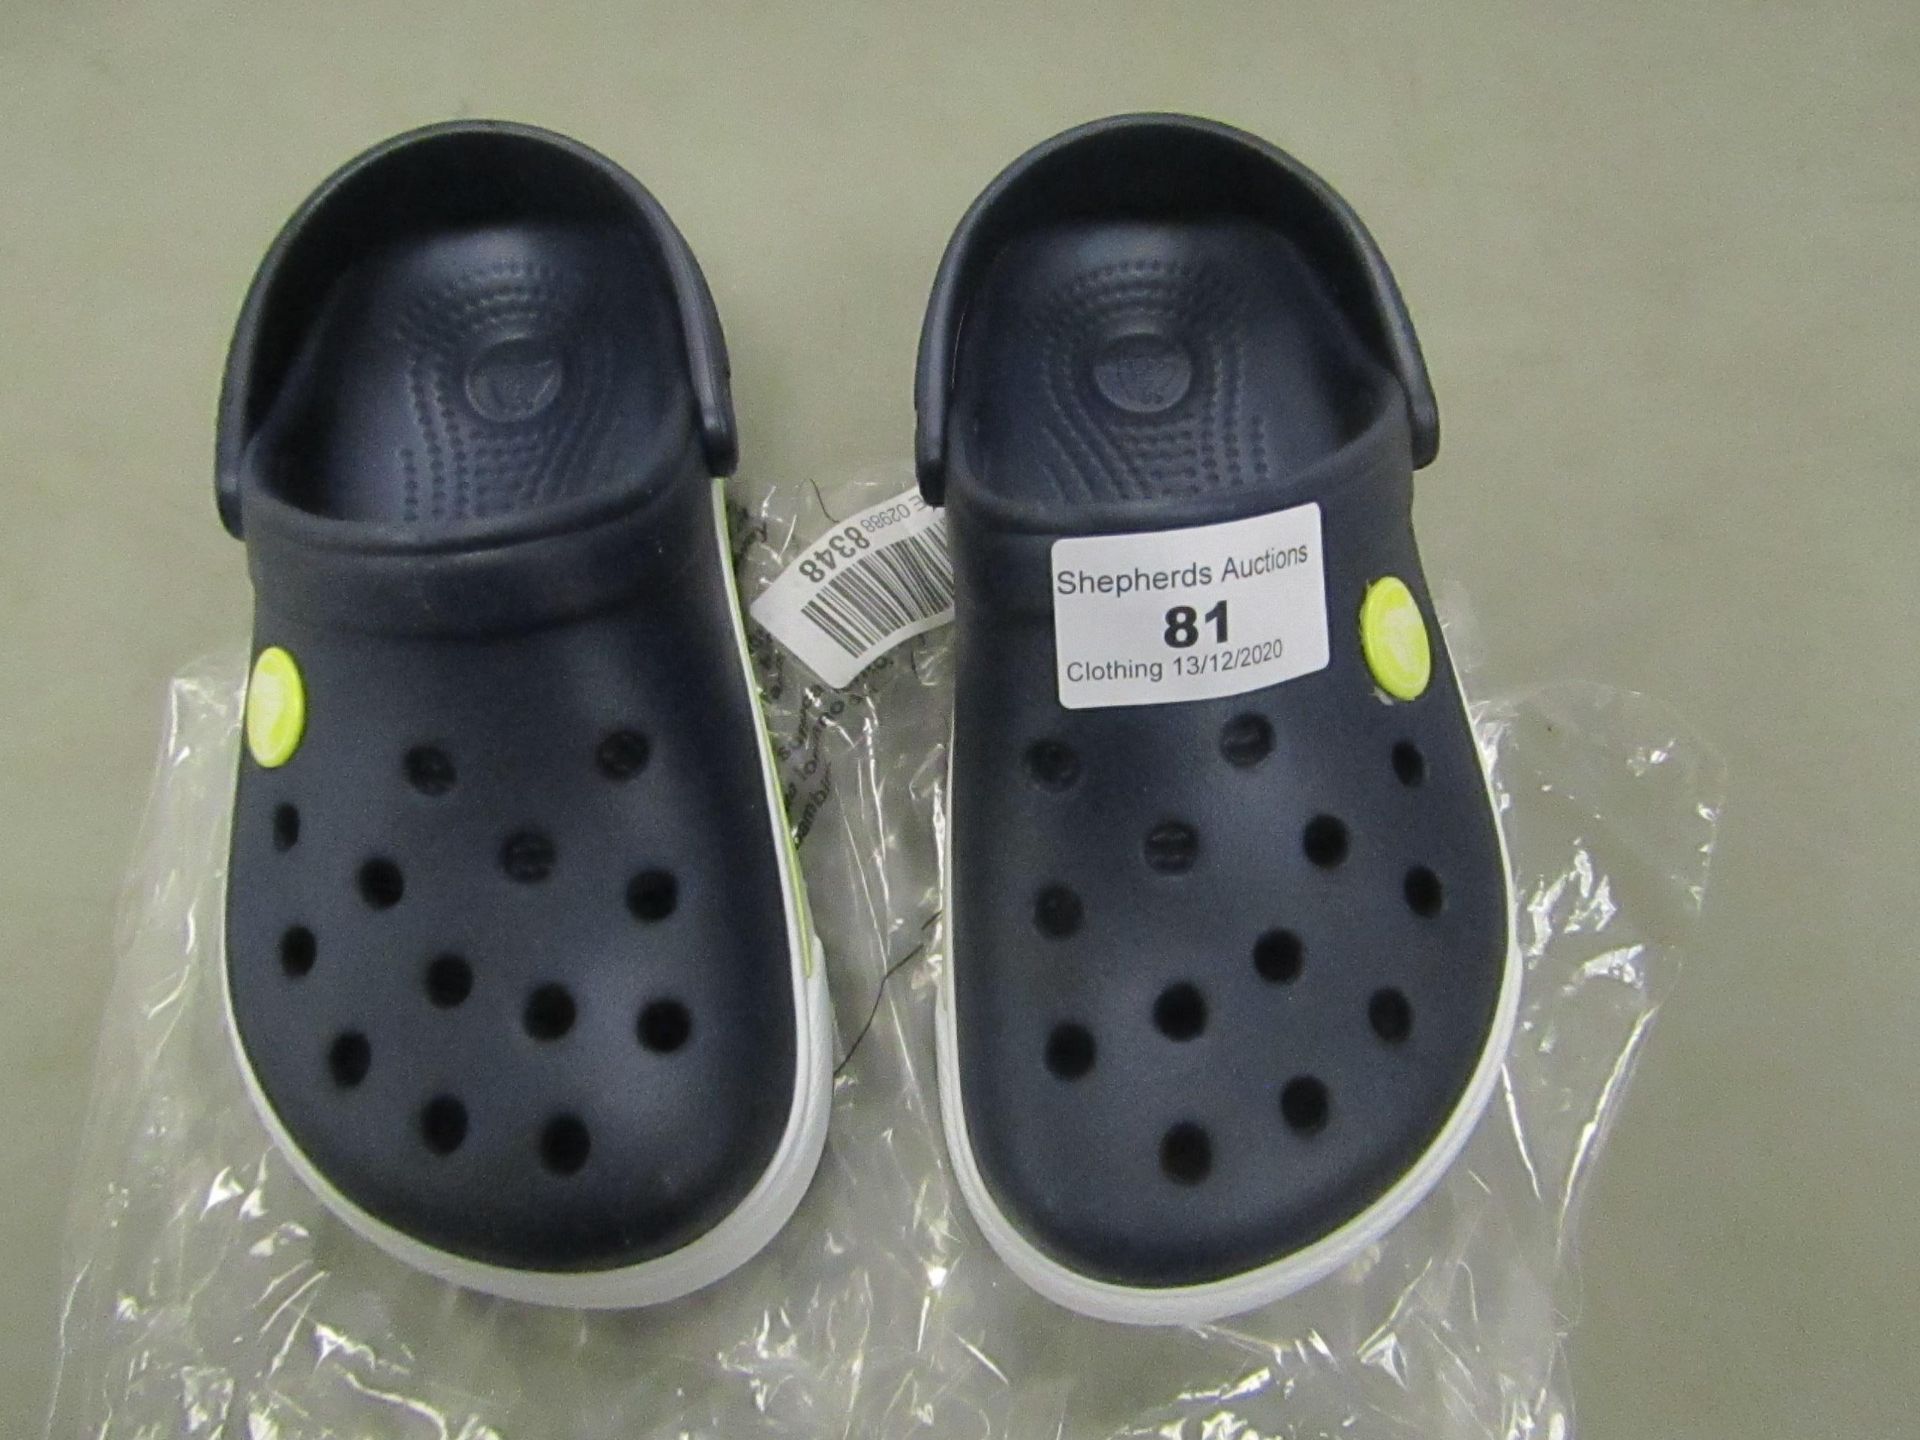 1 X Pair of Childrens Crocs Size 10-11 navy new